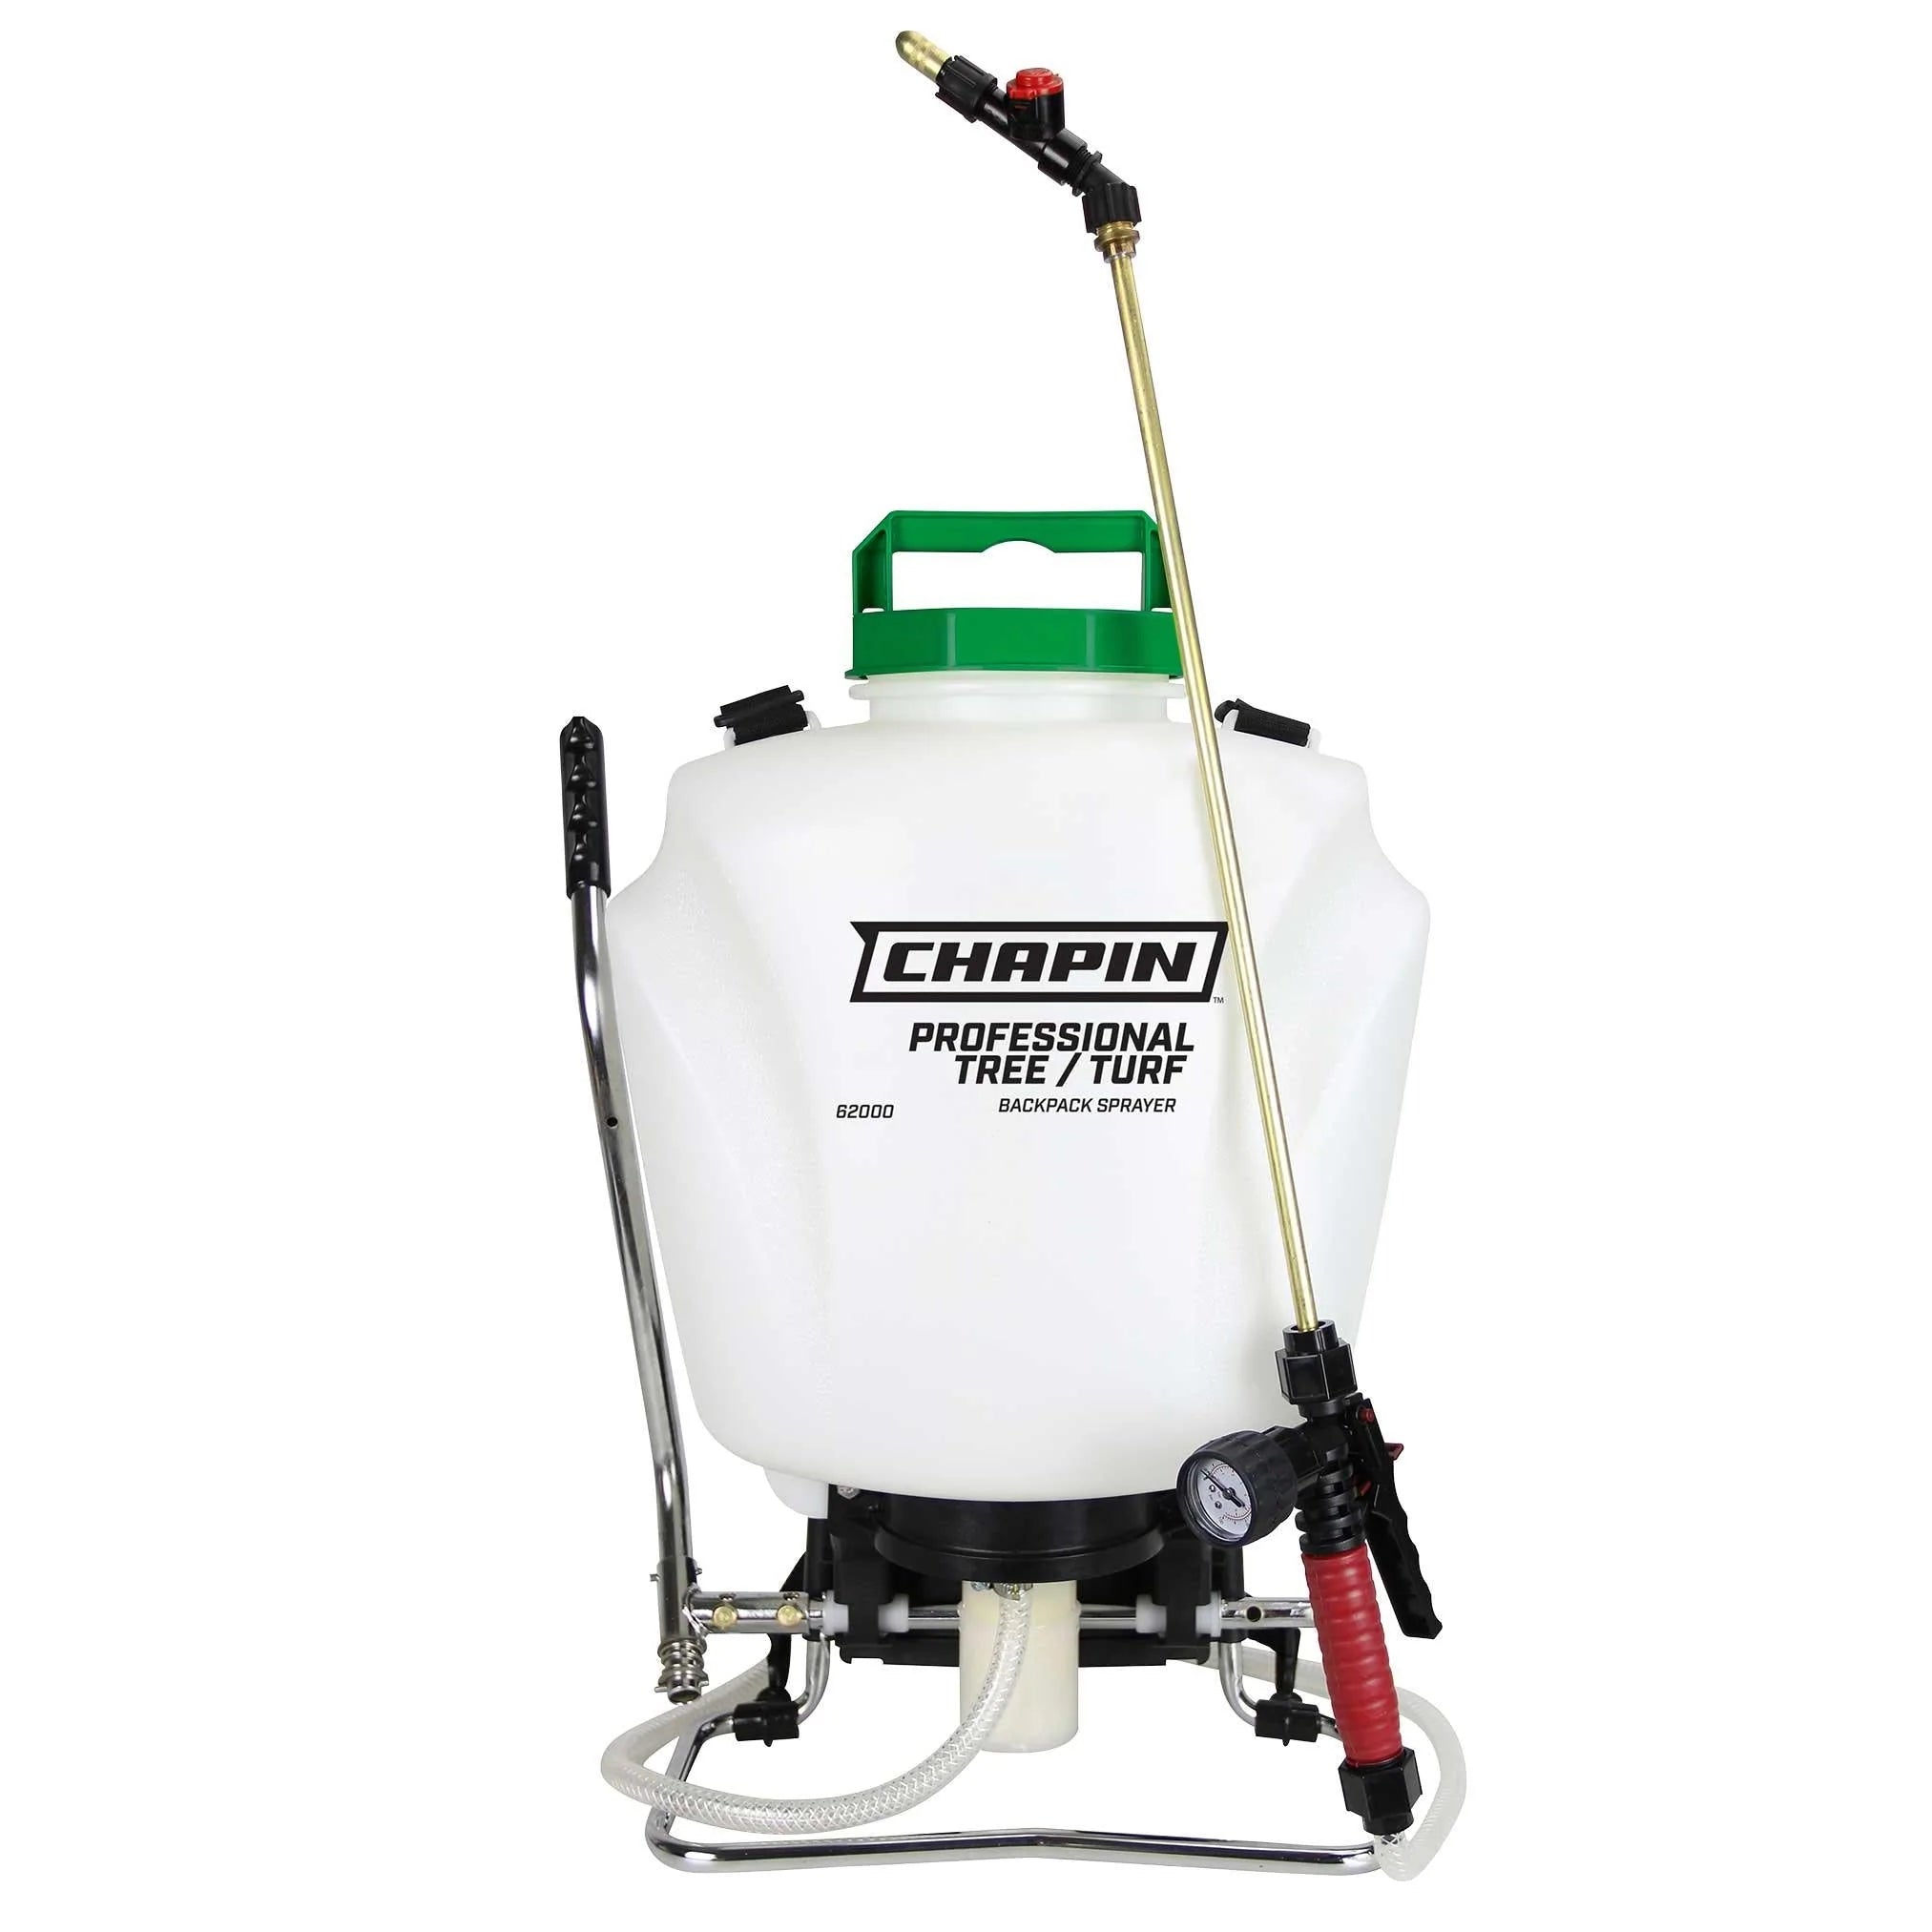 https://chapinmfg.com/cdn/shop/products/chapin-62000-4-gallon-tree-and-turf-pro-commercial-manual-backpack-sprayer-with-control-flow-valve-technology-chapin-international-1-22095601369170.webp?v=1693318969